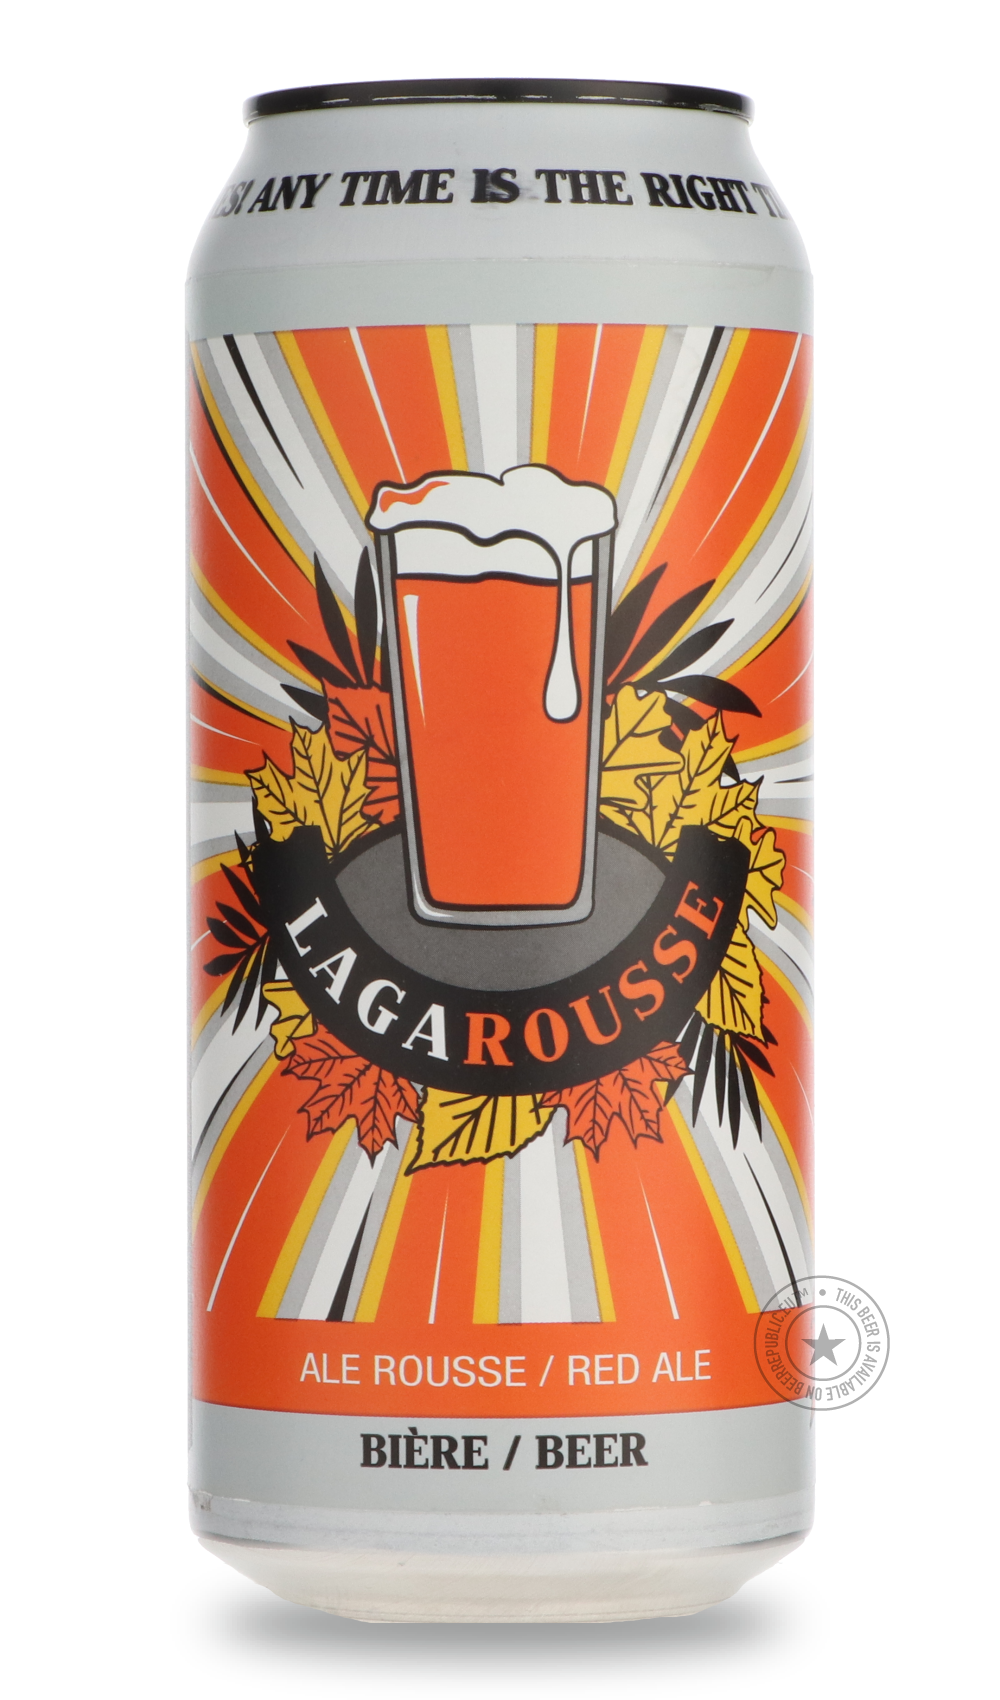 -Lagabière- LagaRousse-Brown & Dark- Only @ Beer Republic - The best online beer store for American & Canadian craft beer - Buy beer online from the USA and Canada - Bier online kopen - Amerikaans bier kopen - Craft beer store - Craft beer kopen - Amerikanisch bier kaufen - Bier online kaufen - Acheter biere online - IPA - Stout - Porter - New England IPA - Hazy IPA - Imperial Stout - Barrel Aged - Barrel Aged Imperial Stout - Brown - Dark beer - Blond - Blonde - Pilsner - Lager - Wheat - Weizen - Amber - B